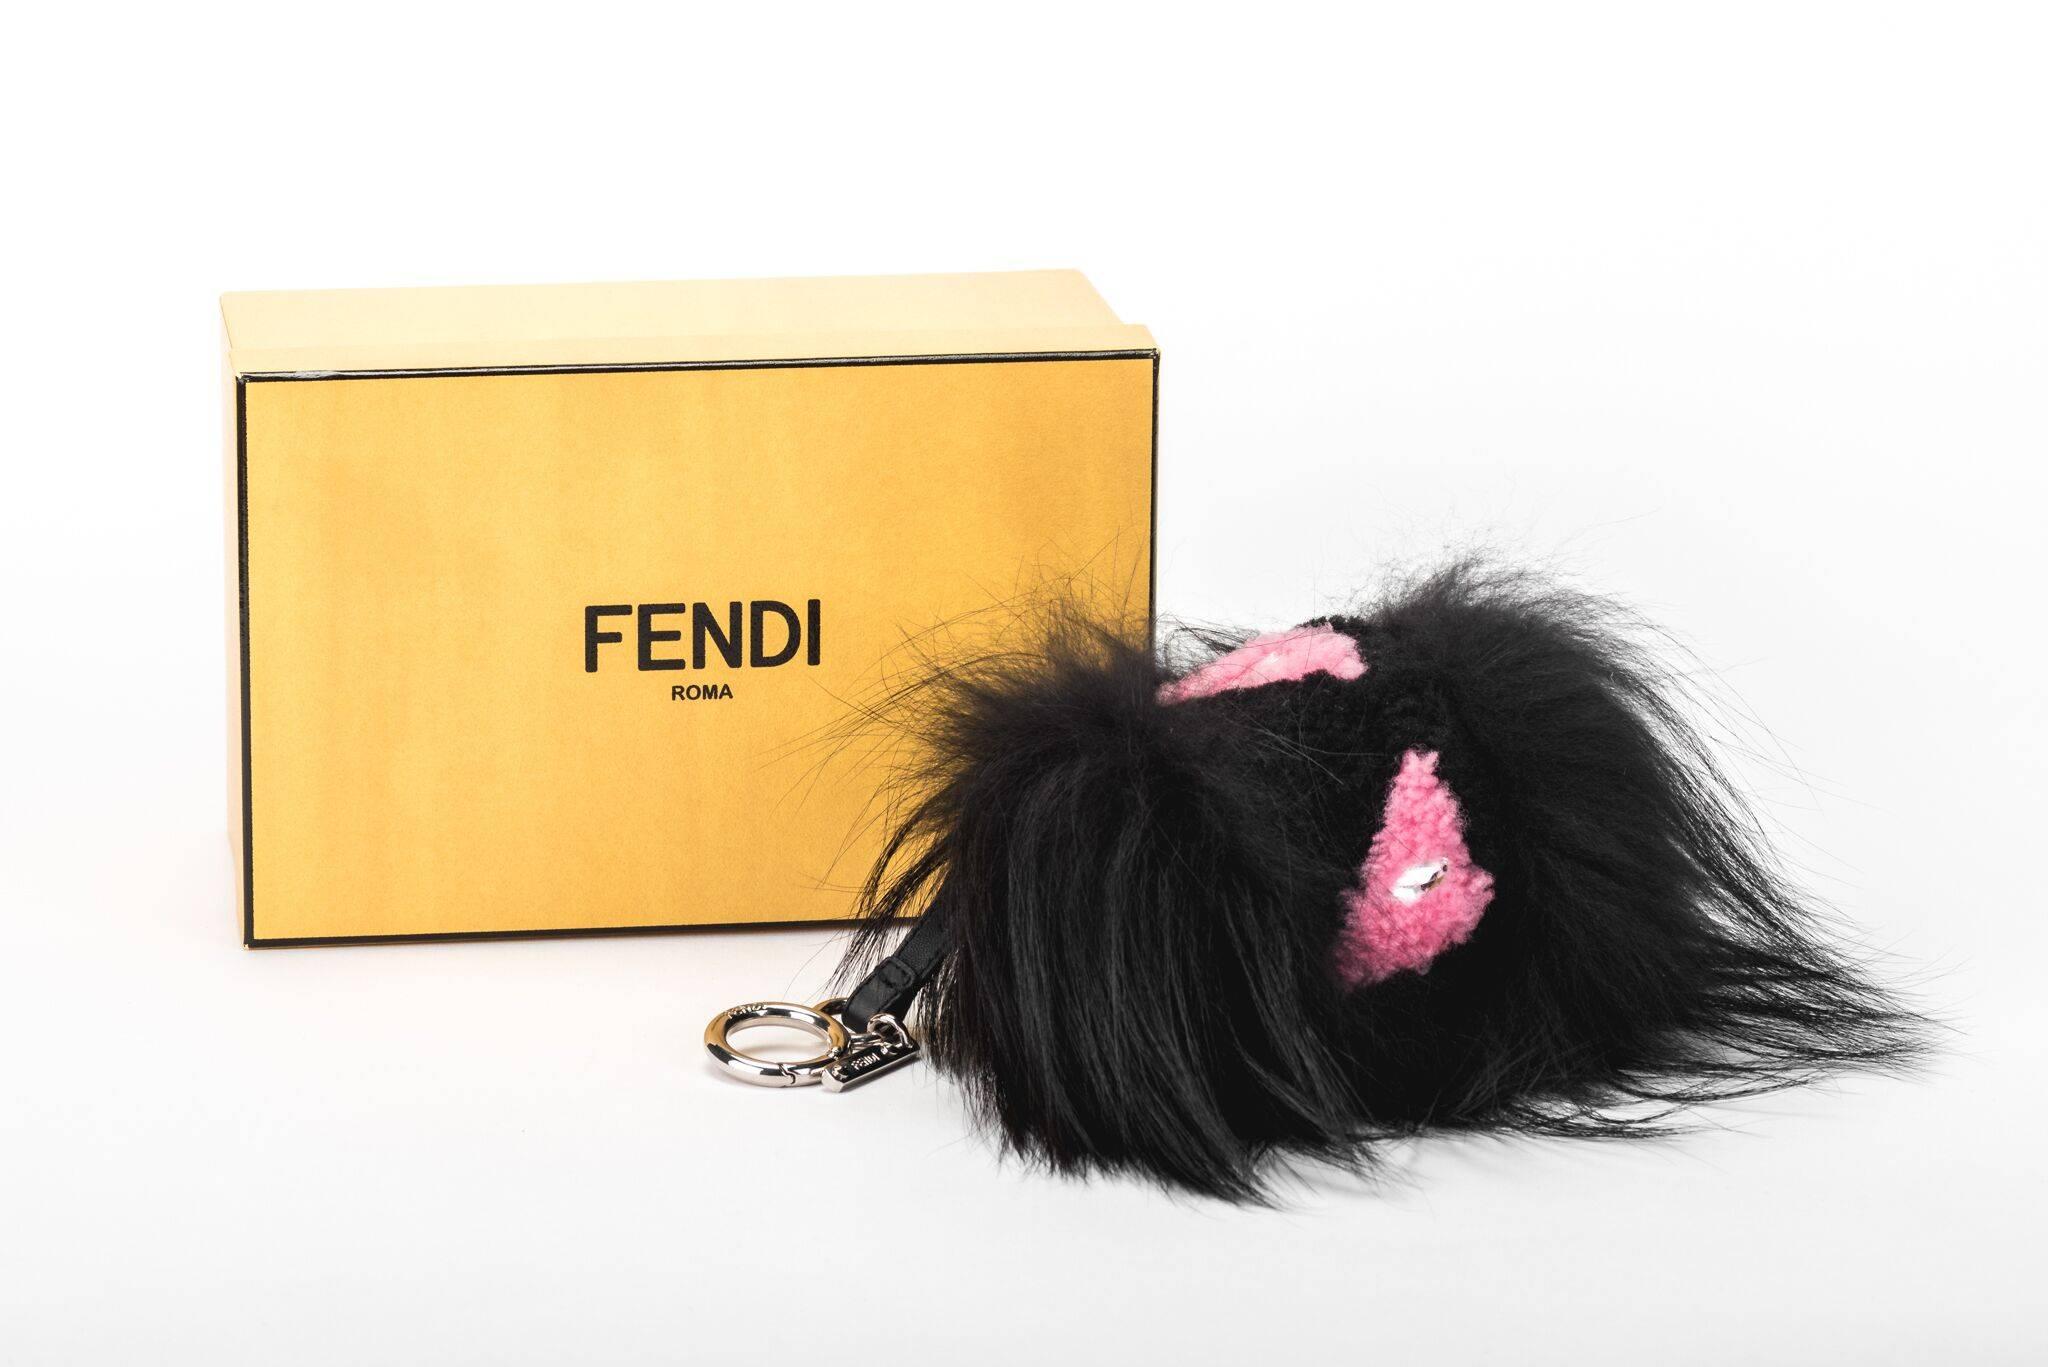 Fendi limited edition black fur monster charm with original box.  
Designed by Karl Lagerfeld.
Box is slightly damaged.